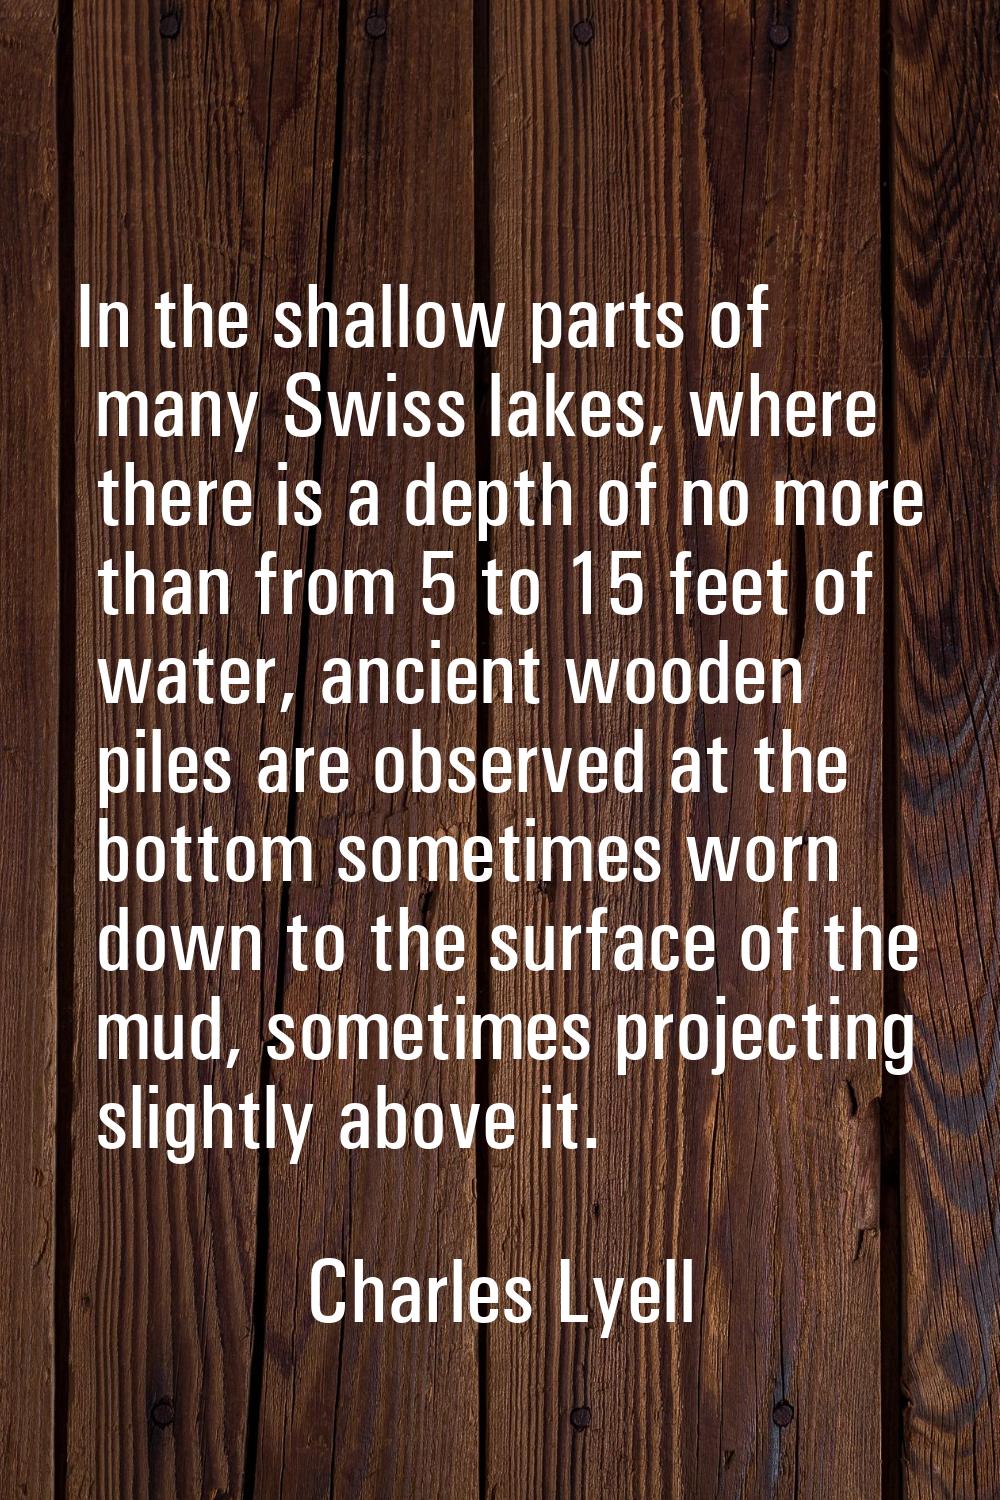 In the shallow parts of many Swiss lakes, where there is a depth of no more than from 5 to 15 feet 